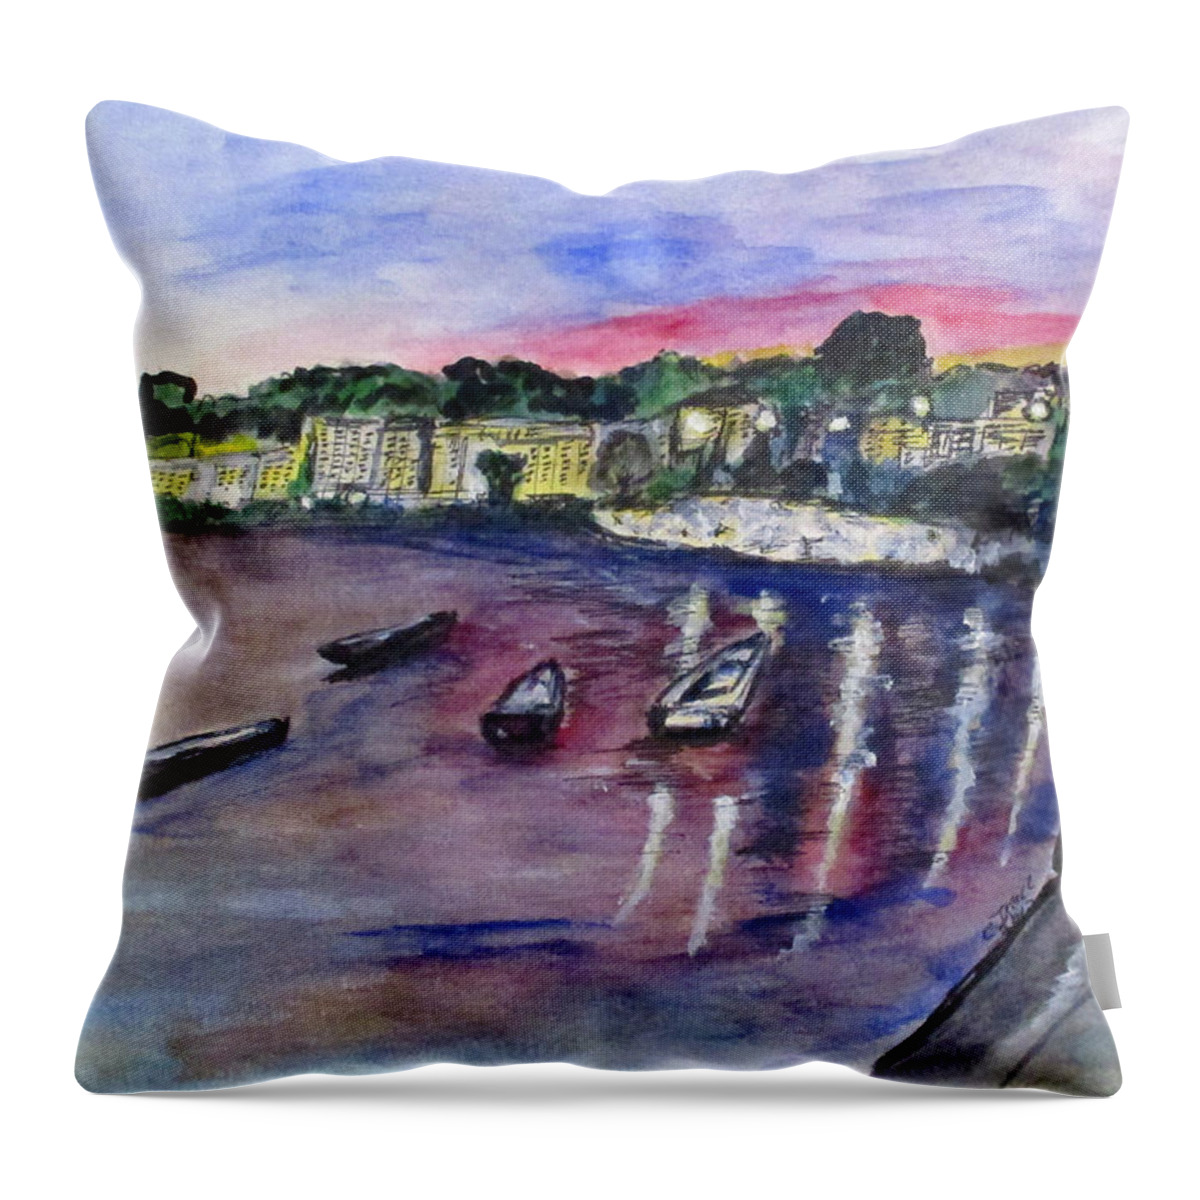 Seascape Throw Pillow featuring the painting Luogo Mergellina, Napoli by Clyde J Kell